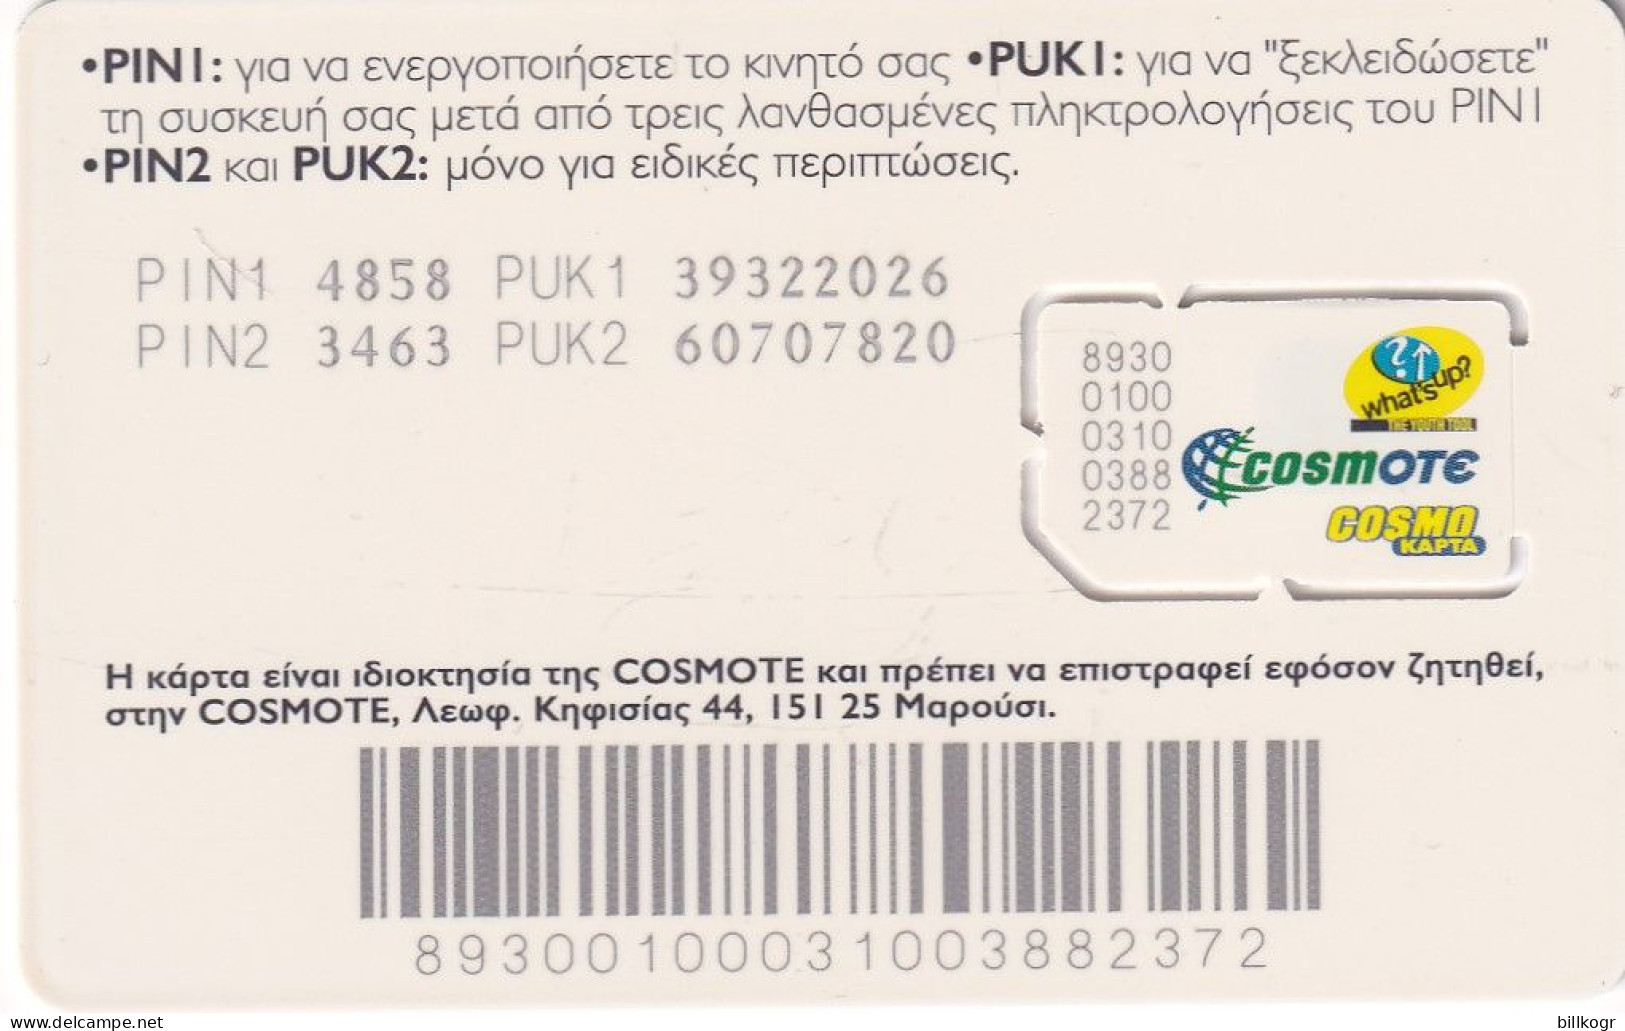 GREECE - Athens 2004 Olympics, Cosmote GSM, Mint - Greece